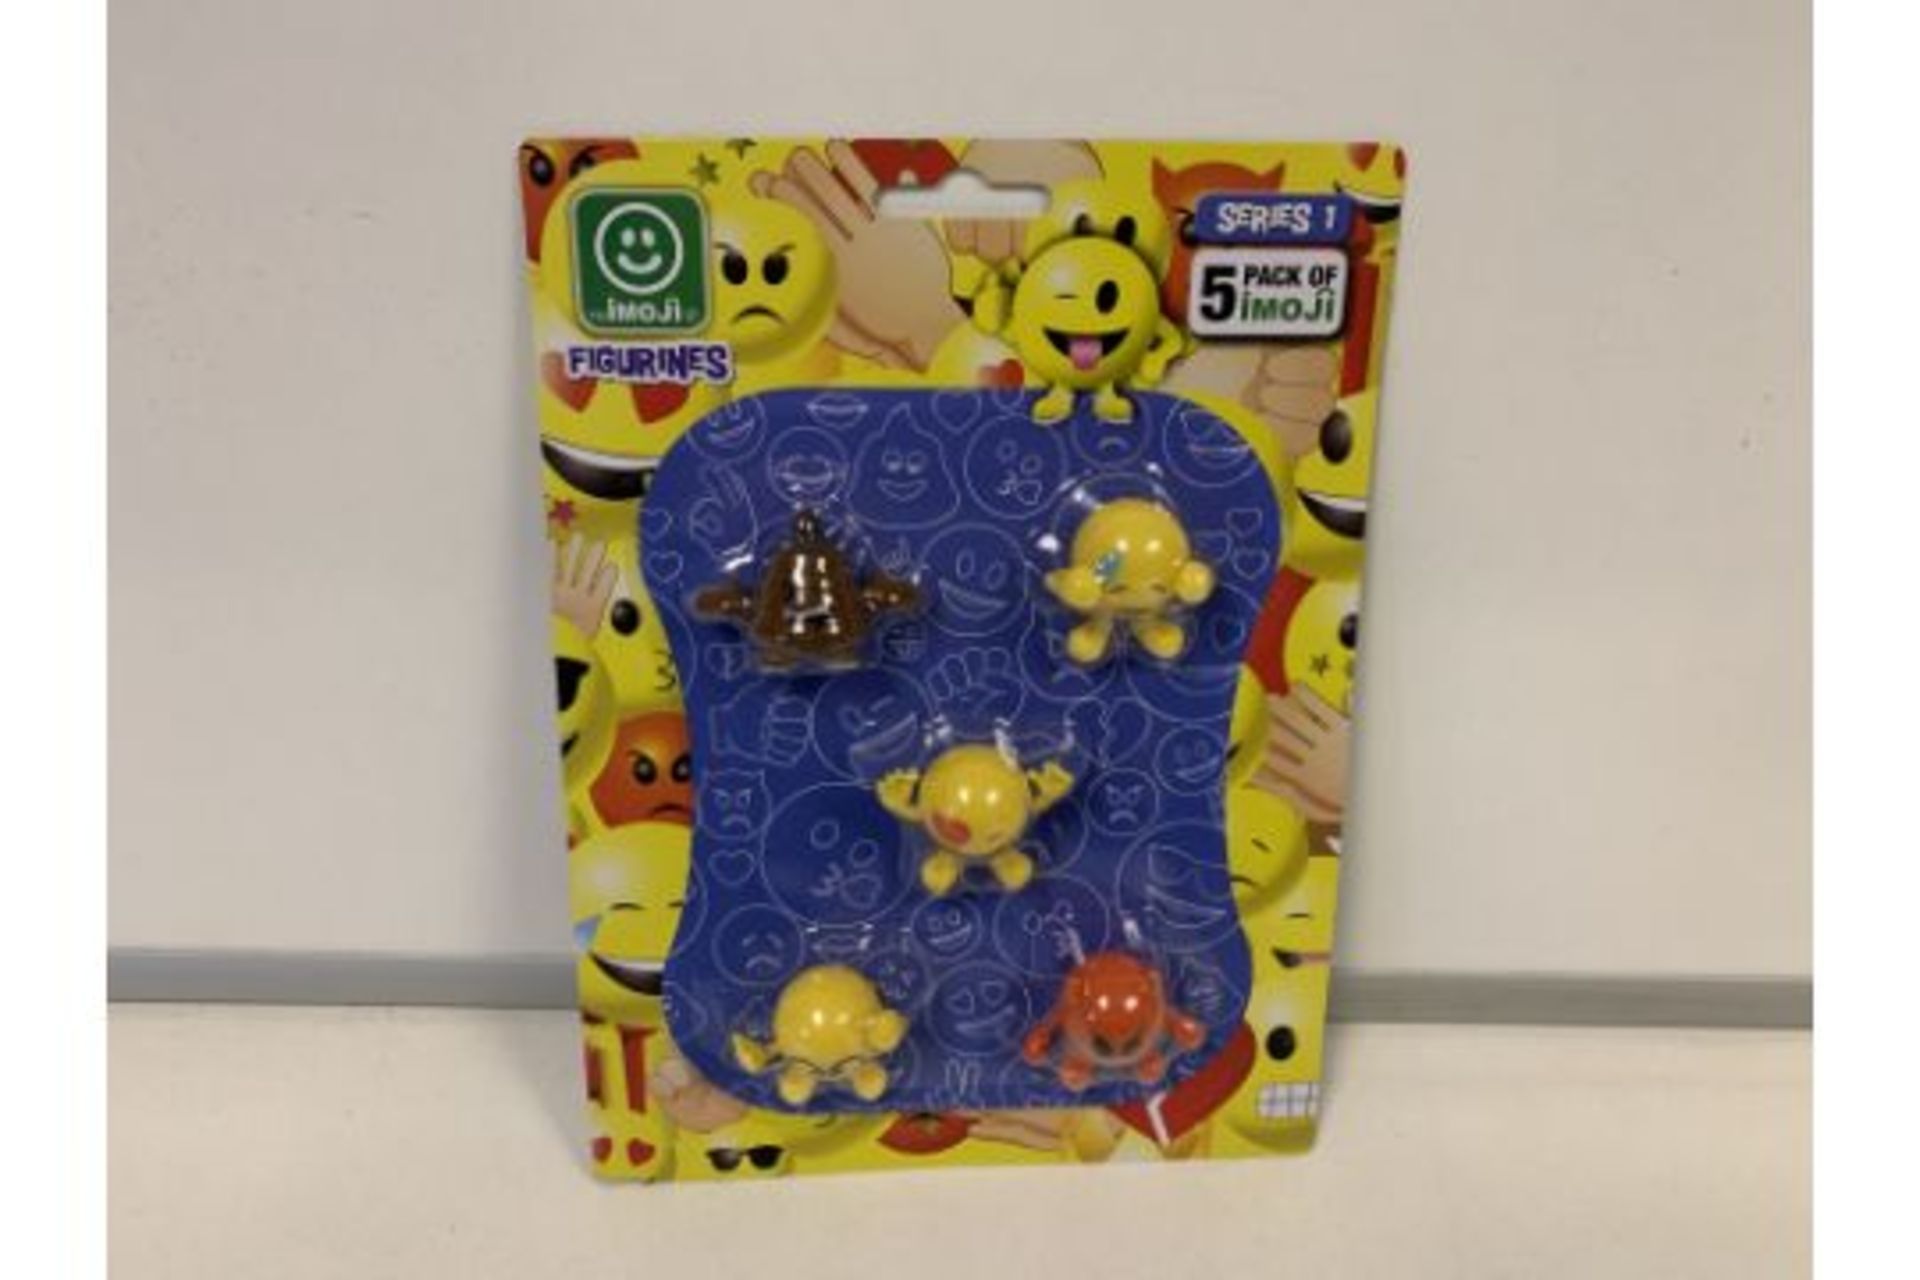 24 X BRAND NEW ASSORTED EMOJI STAMPS PACKS OF 5